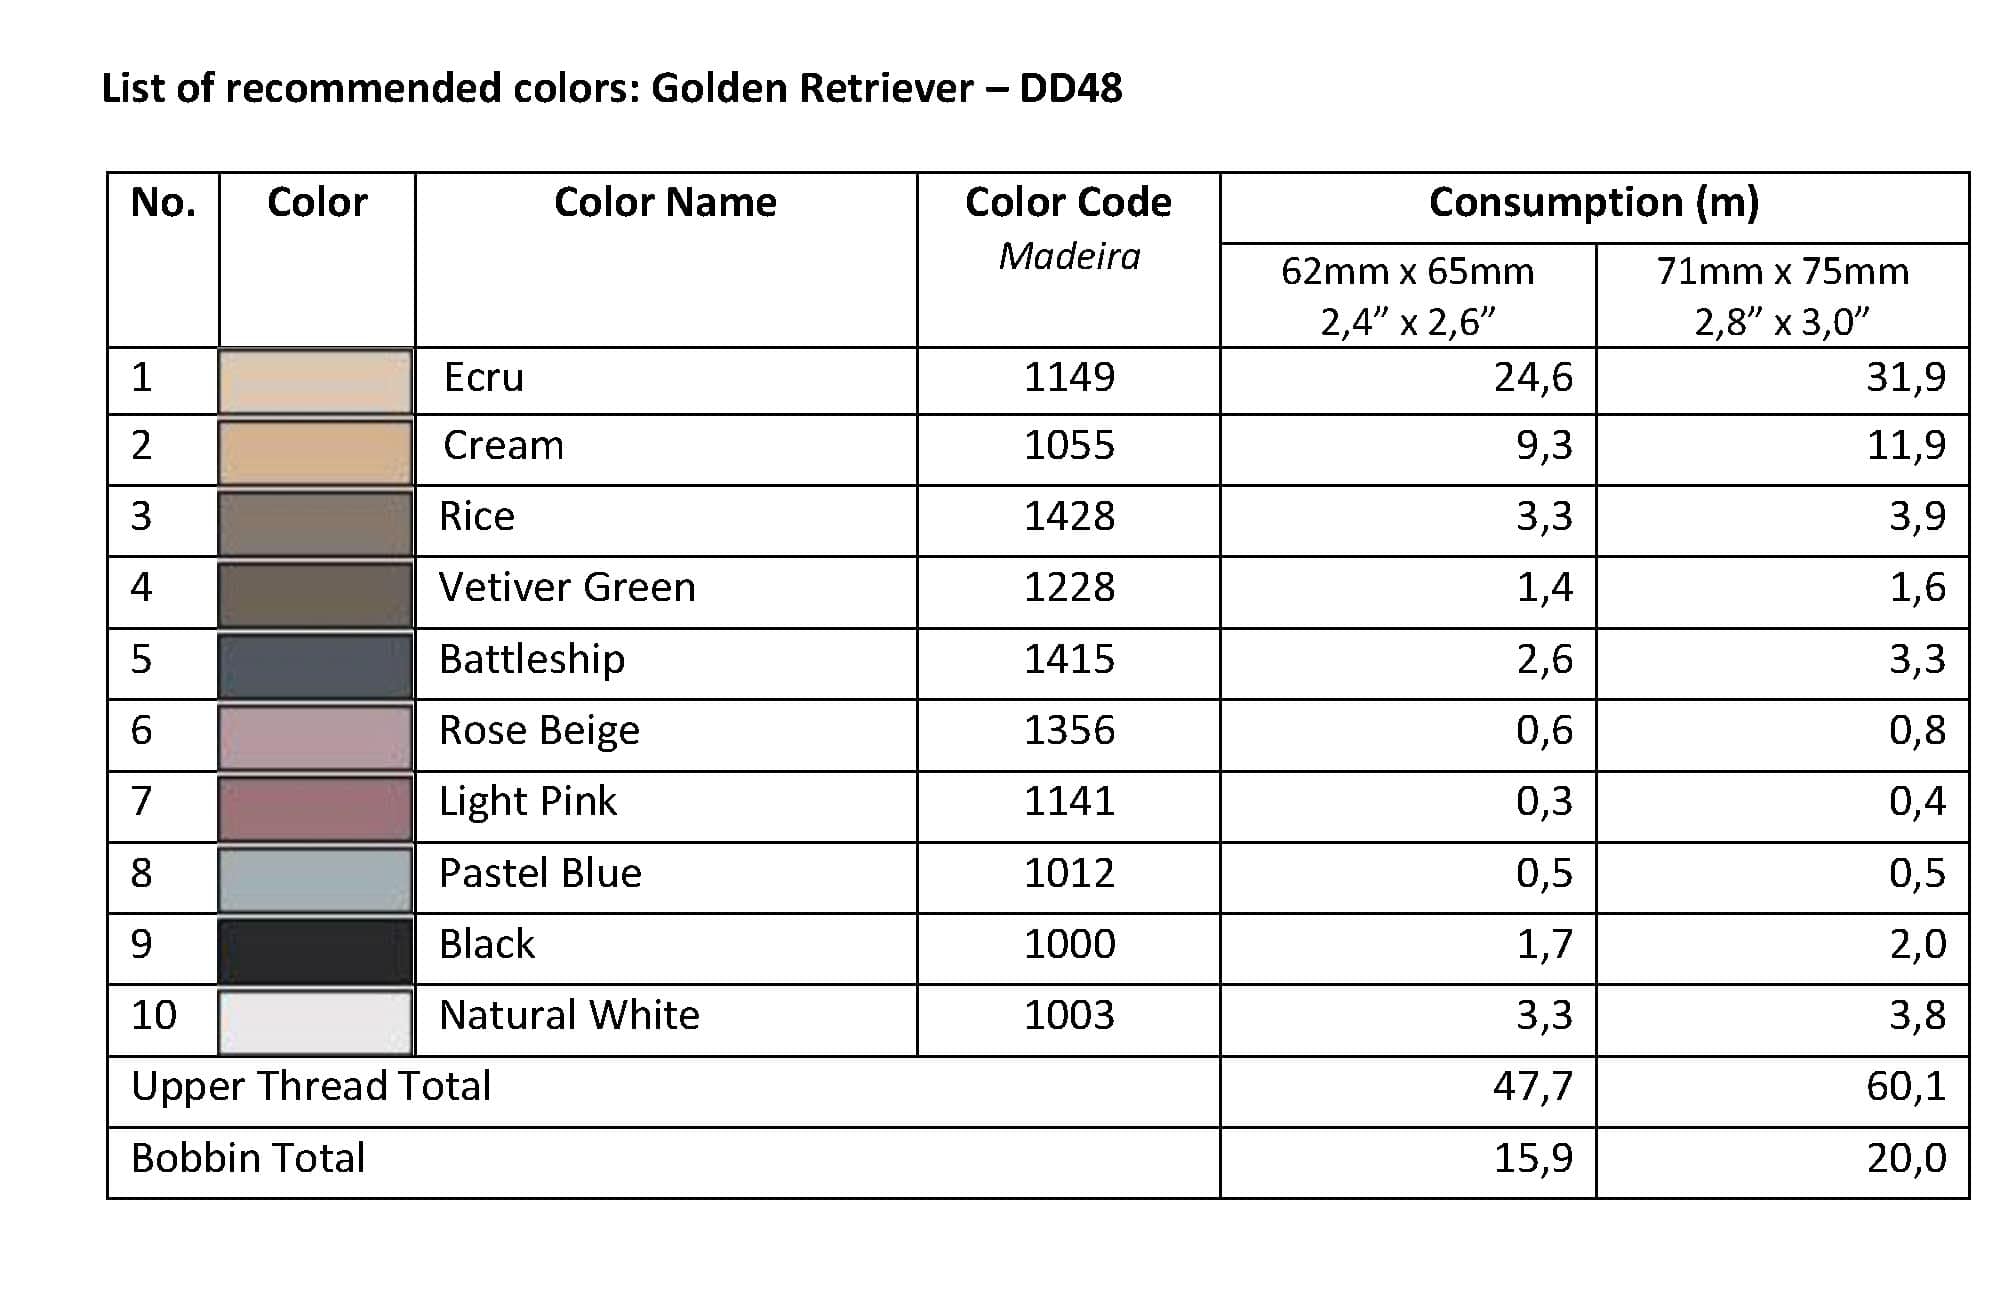 List of Recommended Colors - Golden Retriever DD48